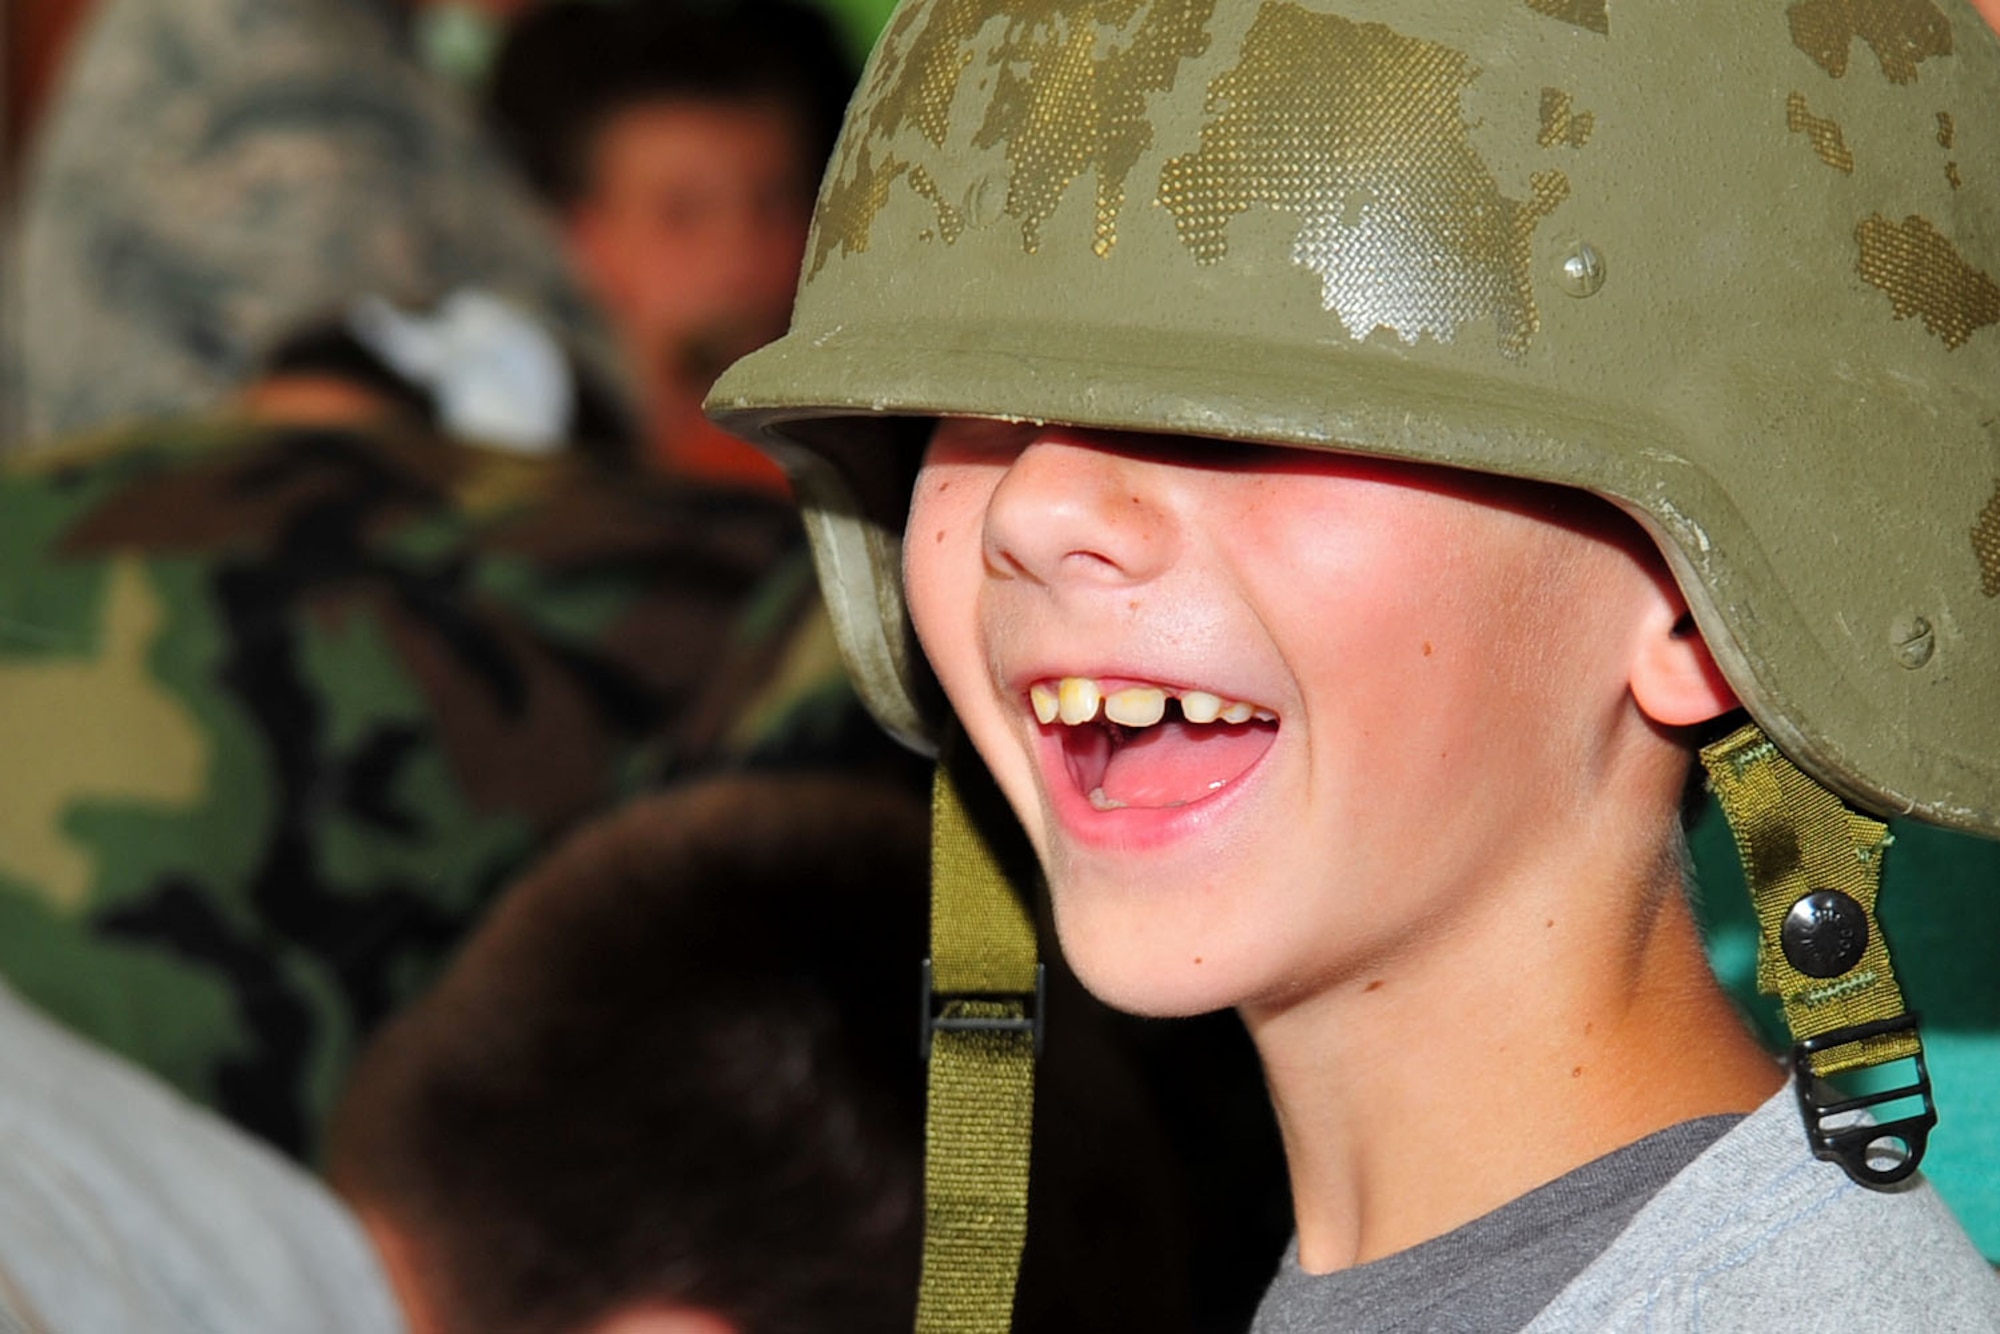 A Team Shaw child wears a helmet during a Kids Meet the Shaw Weasels event, hosted by 20th Force Support Squadron Airman and Family Readiness Center, at Shaw Air Force, S.C., July 28, 2017. During the event, children had the opportunity to try on individual protective equipment and get a close look at a 20th Fighter Wing F-16CM Fighting Falcon. (U.S. Air Force photo by Airman 1st Class Kathryn R.C. Reaves)